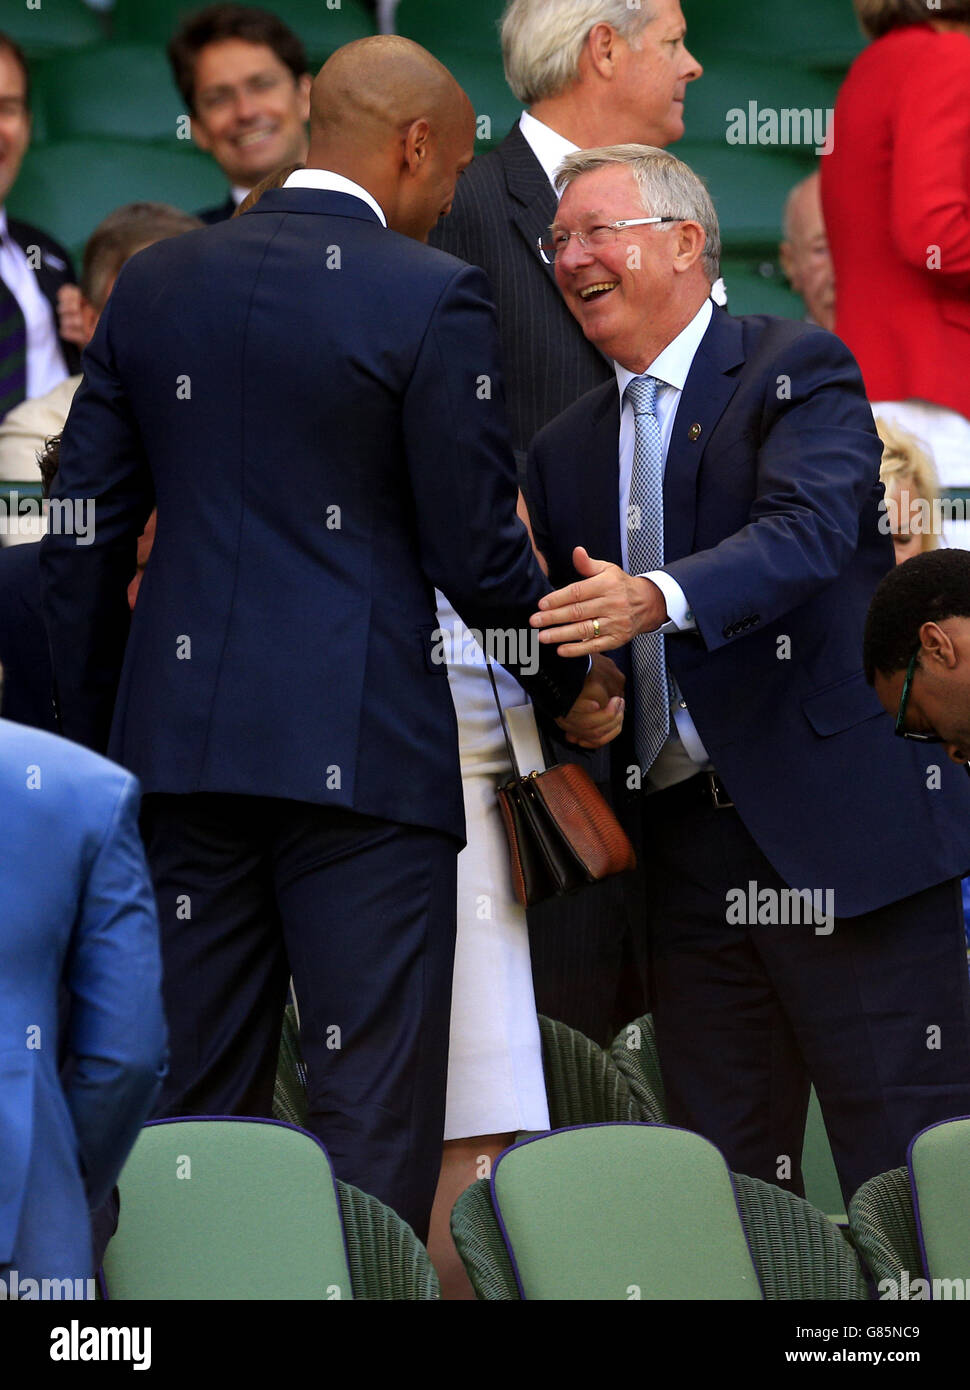 thierry-henry-left-shakes-hands-with-sir-alex-ferguson-right-in-the-G85NC9.jpg